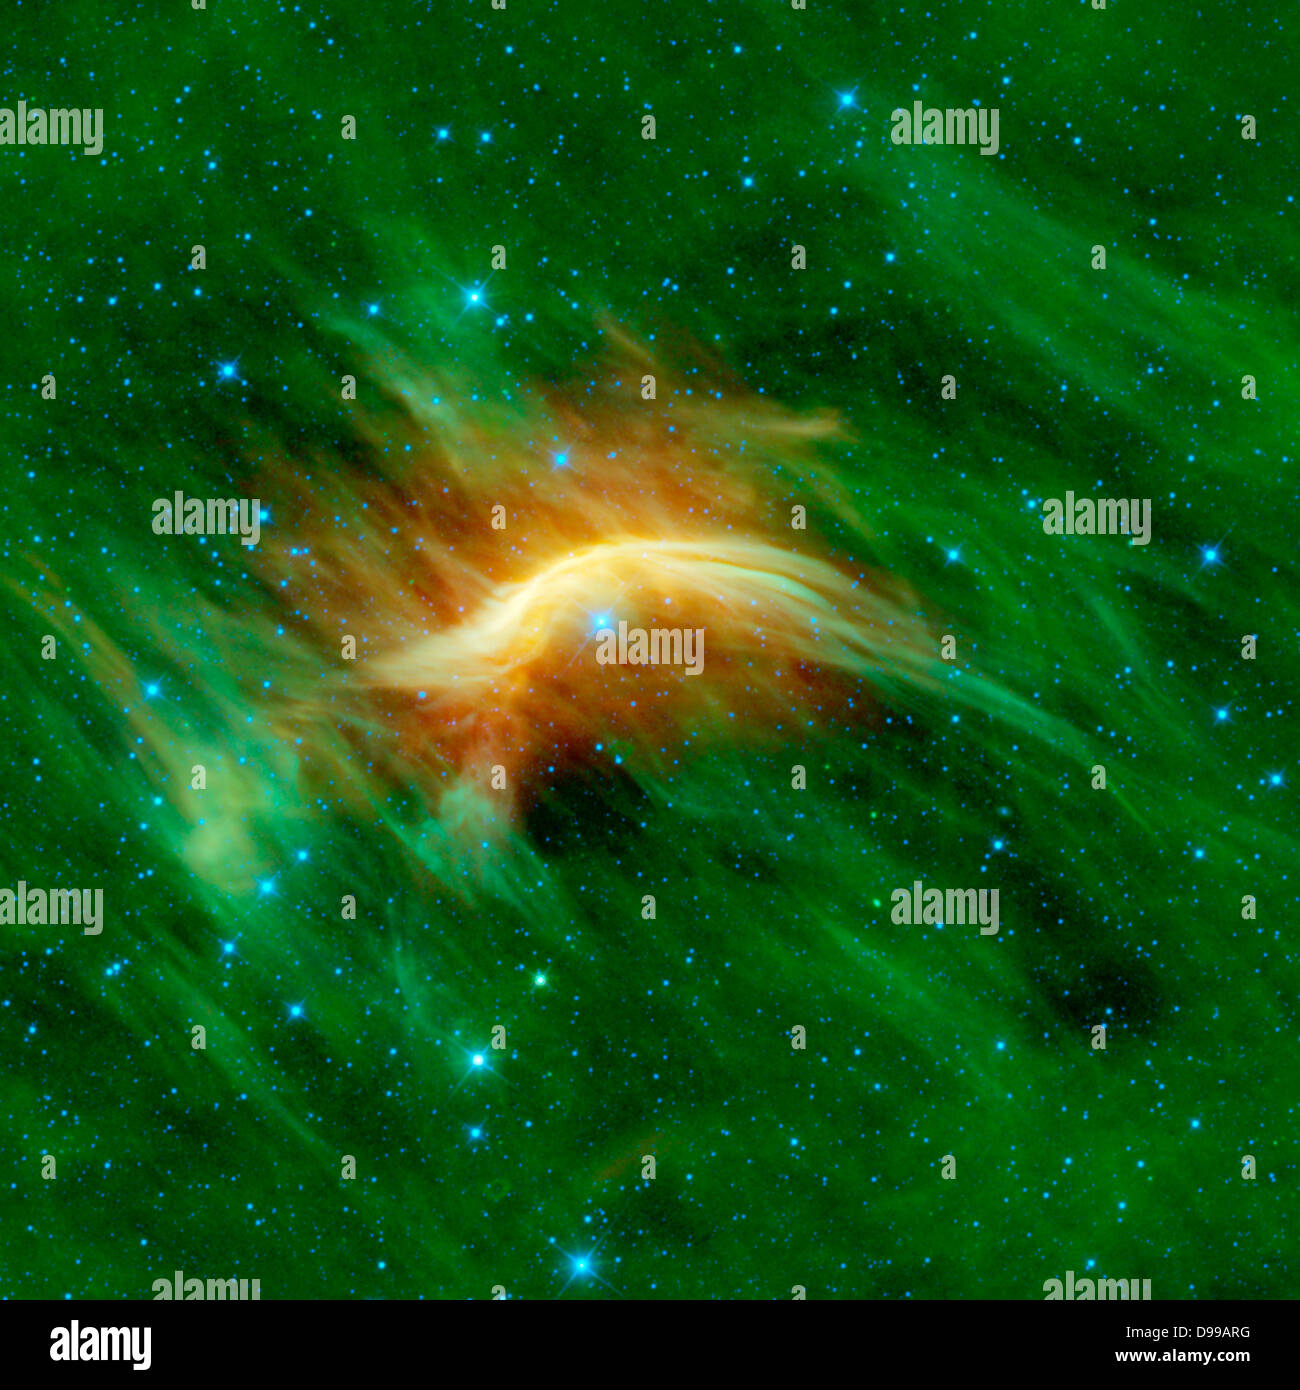 The blue star near the center of this image is Zeta Ophiuchi. Zeta Ophiuchi is actually a very massive, hot, bright blue star plowing its way through a large cloud of interstellar dust and gas. WISE. Stock Photo